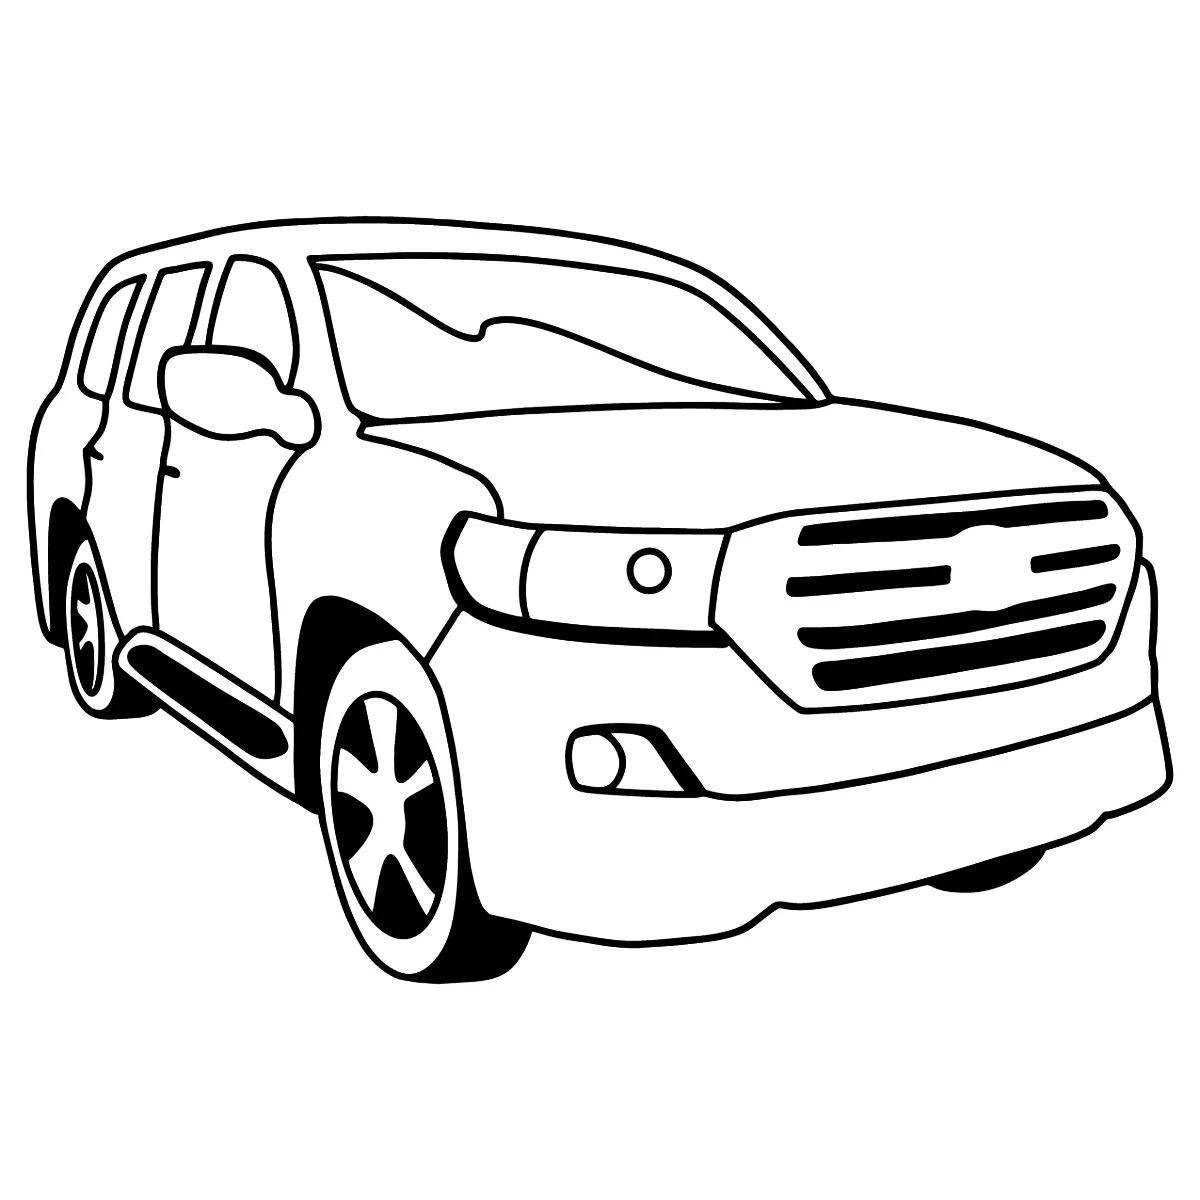 Toyota fine cars coloring book